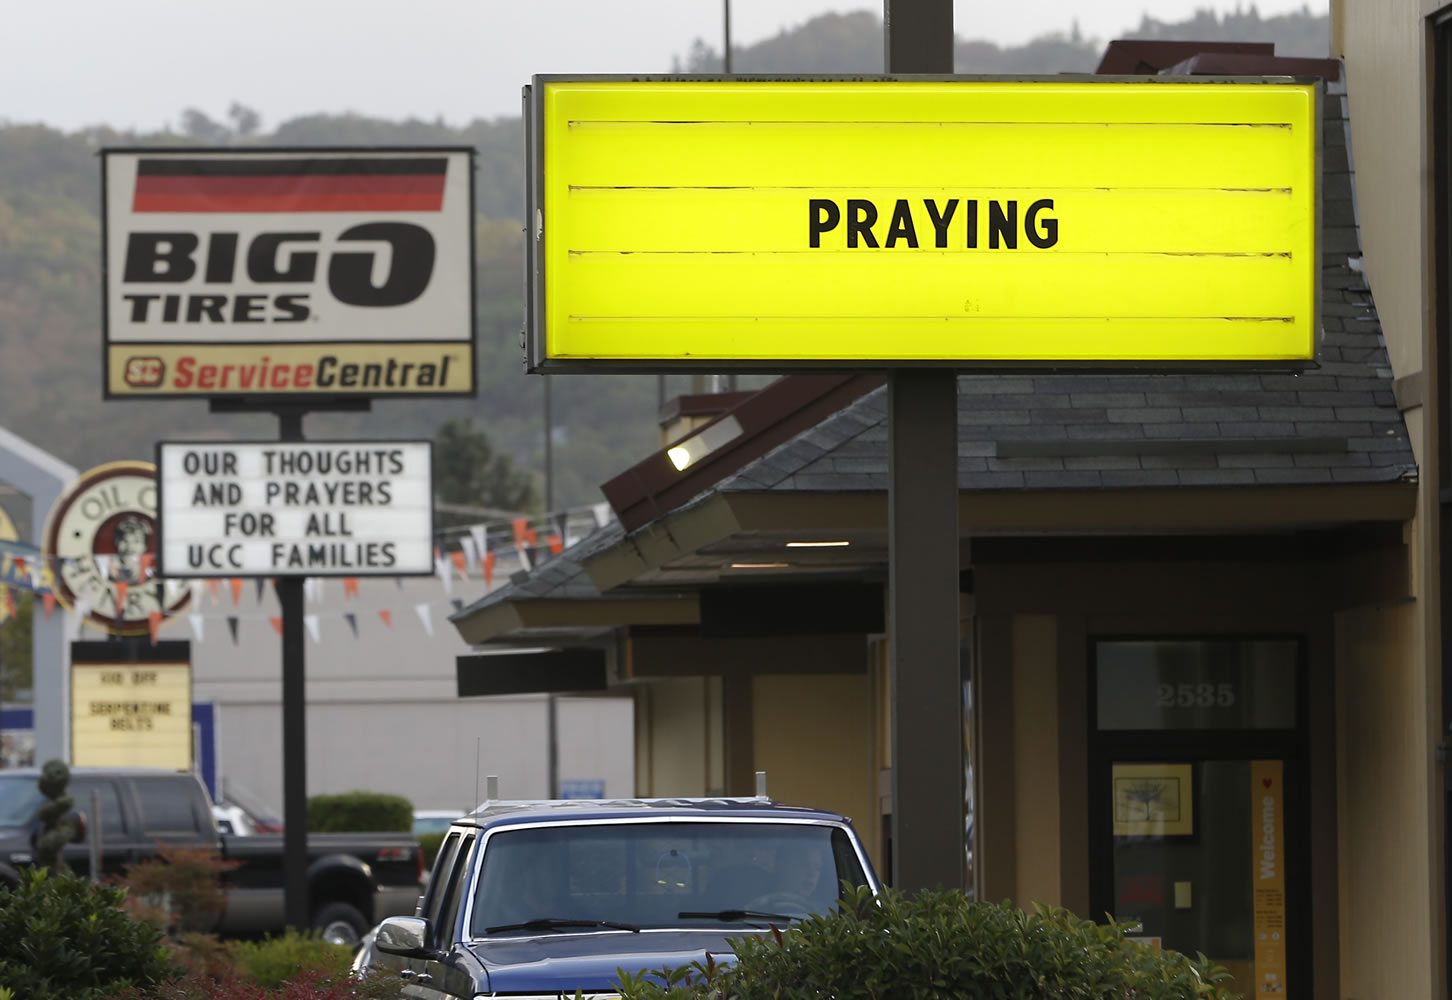 Signs calling for prayers and remembrance for those killed in a fatal shooting at Umpqua Community College, are seen on a pair of local businesses Saturday in Roseburg, Ore.